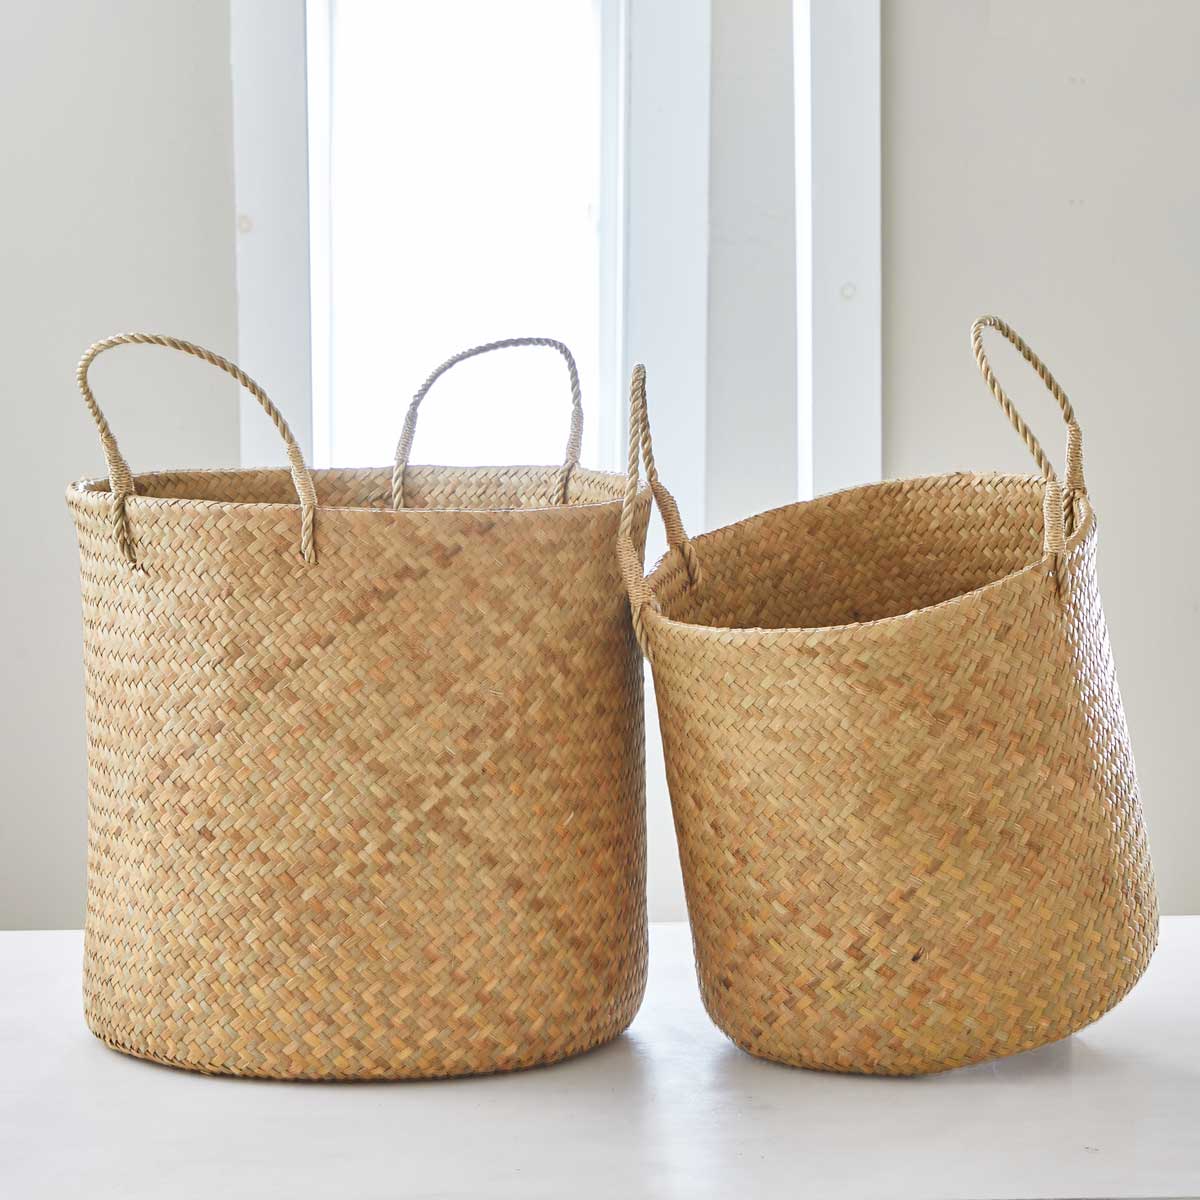 HANDWOVEN BASKETS with BRAIDED HANDLES